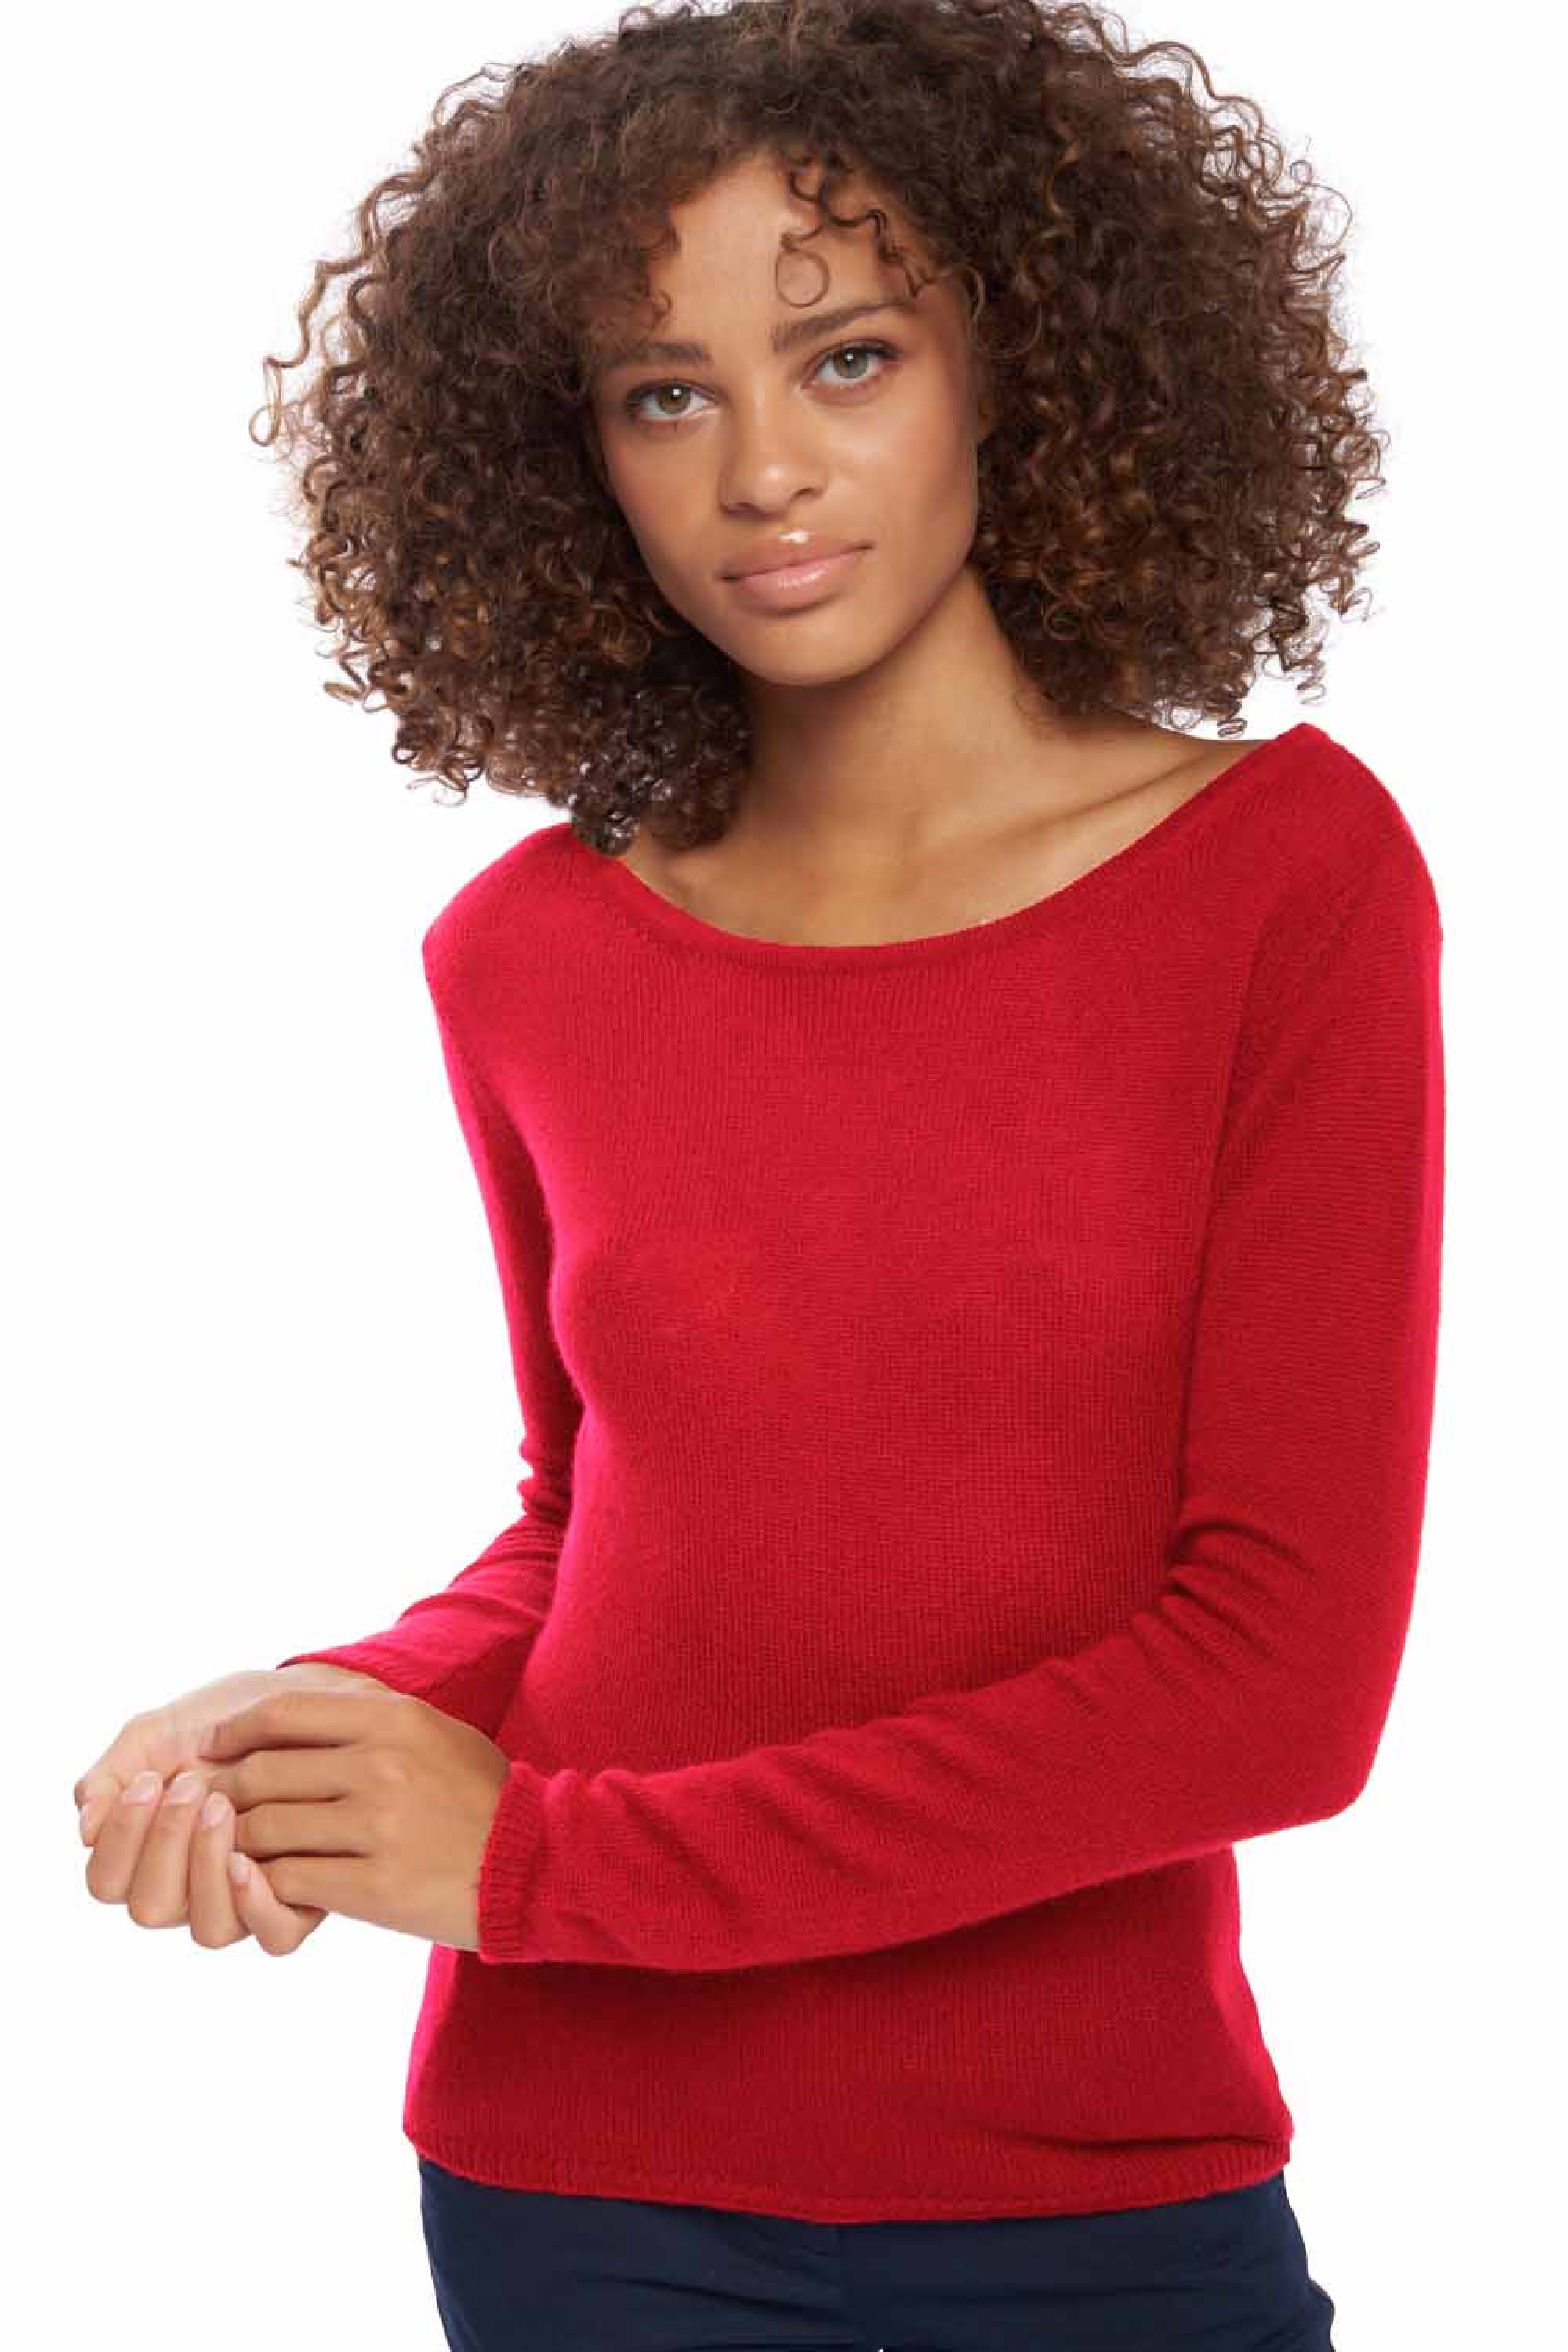 Cashmere ladies basic sweaters at low prices caleen blood red 4xl